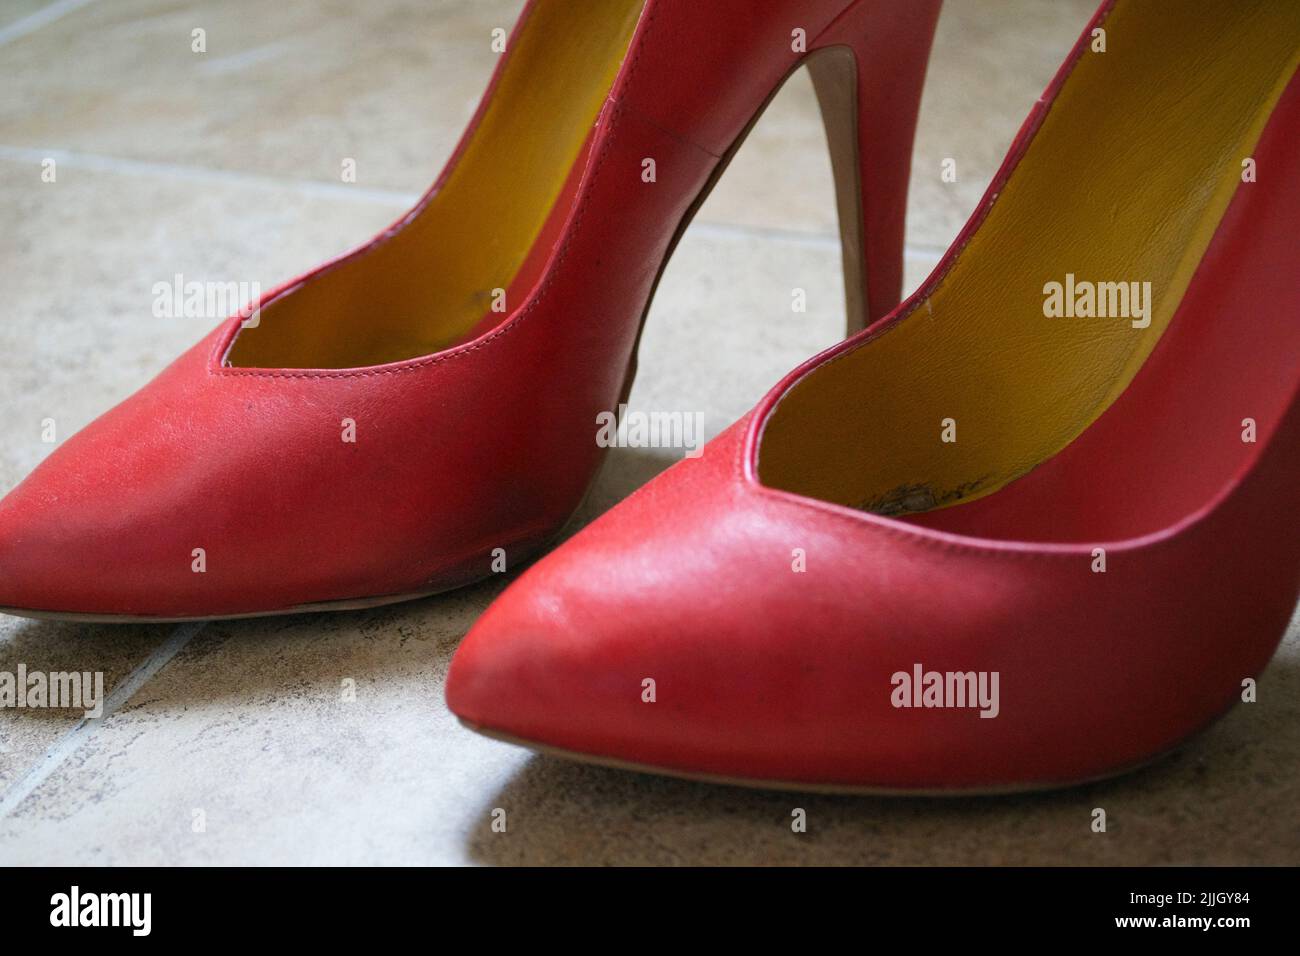 Pair of red high heels shoes Stock Photo - Alamy